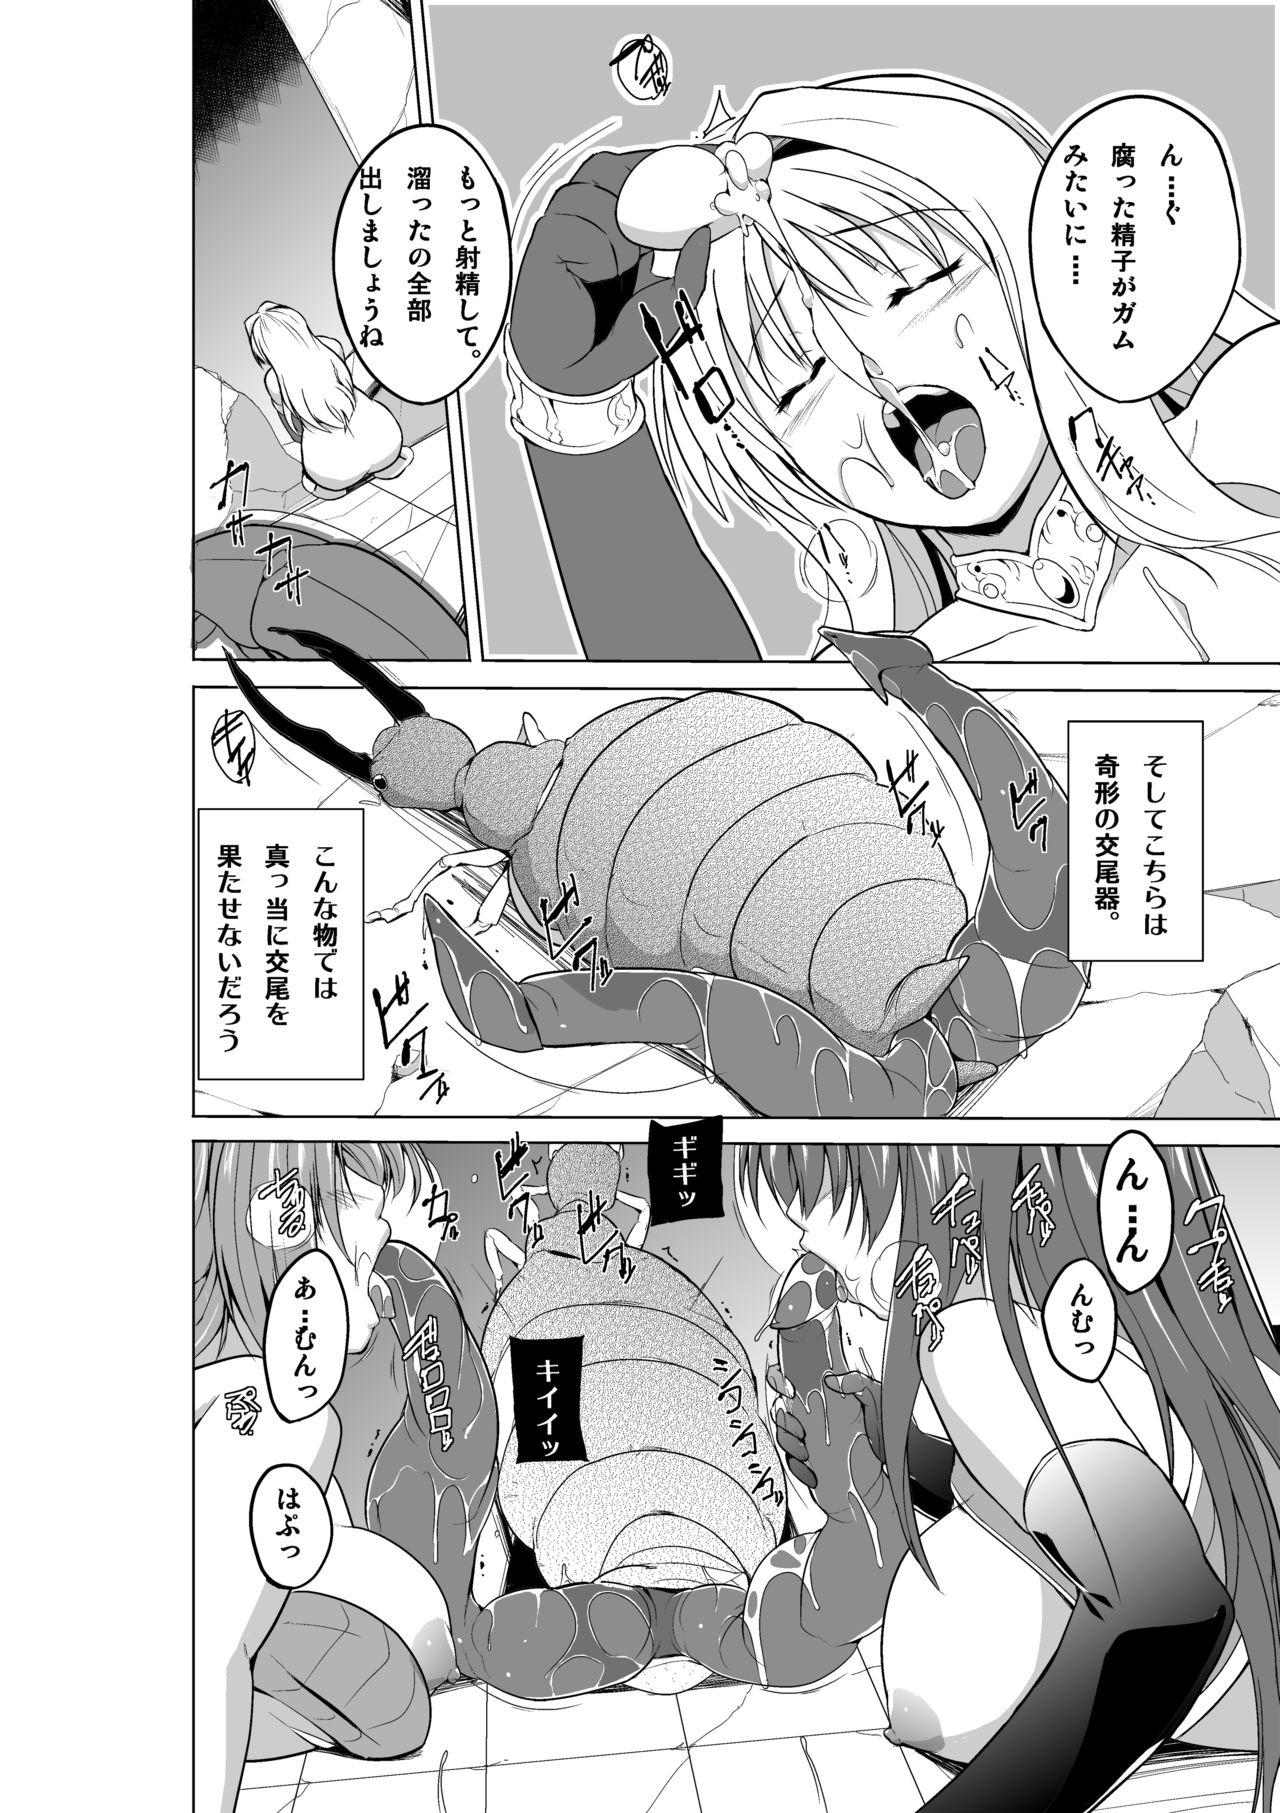 Blondes Dungeon Travelers Minna no Oyuugi - Toheart2 Fucking Sex - Page 6